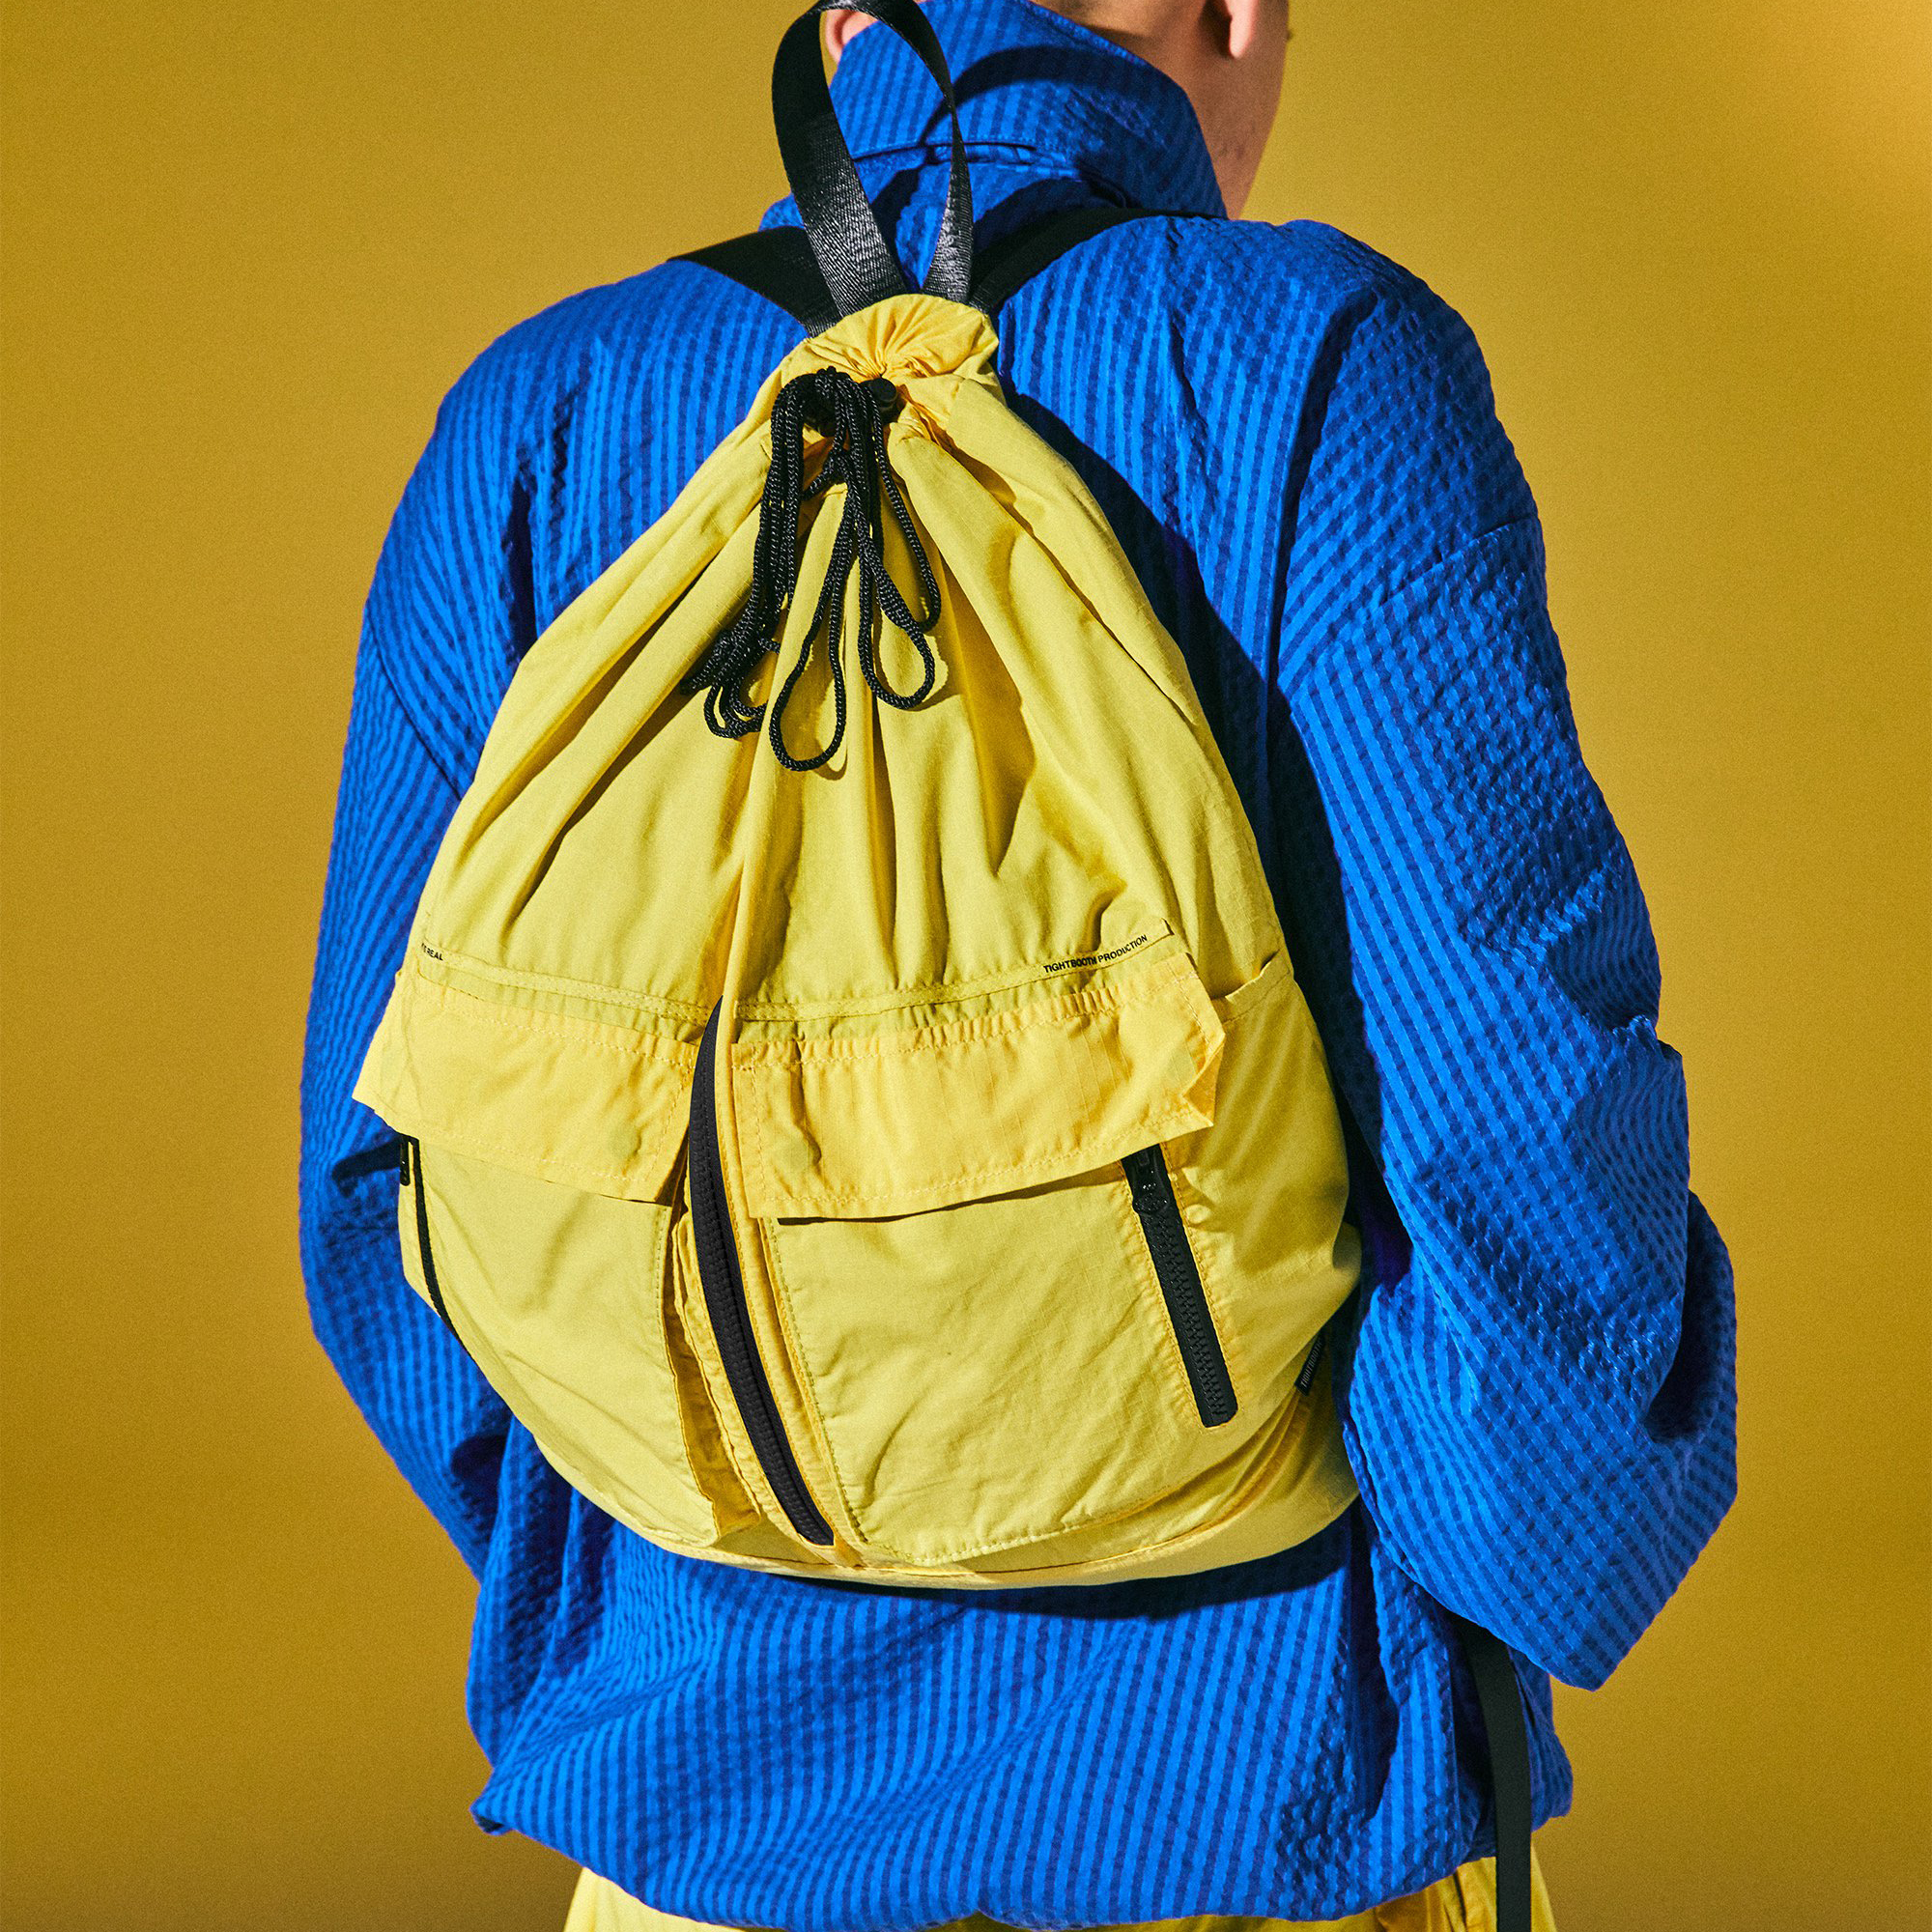 TIGHTBOOTH - Ripstop Knapsack - Yellow